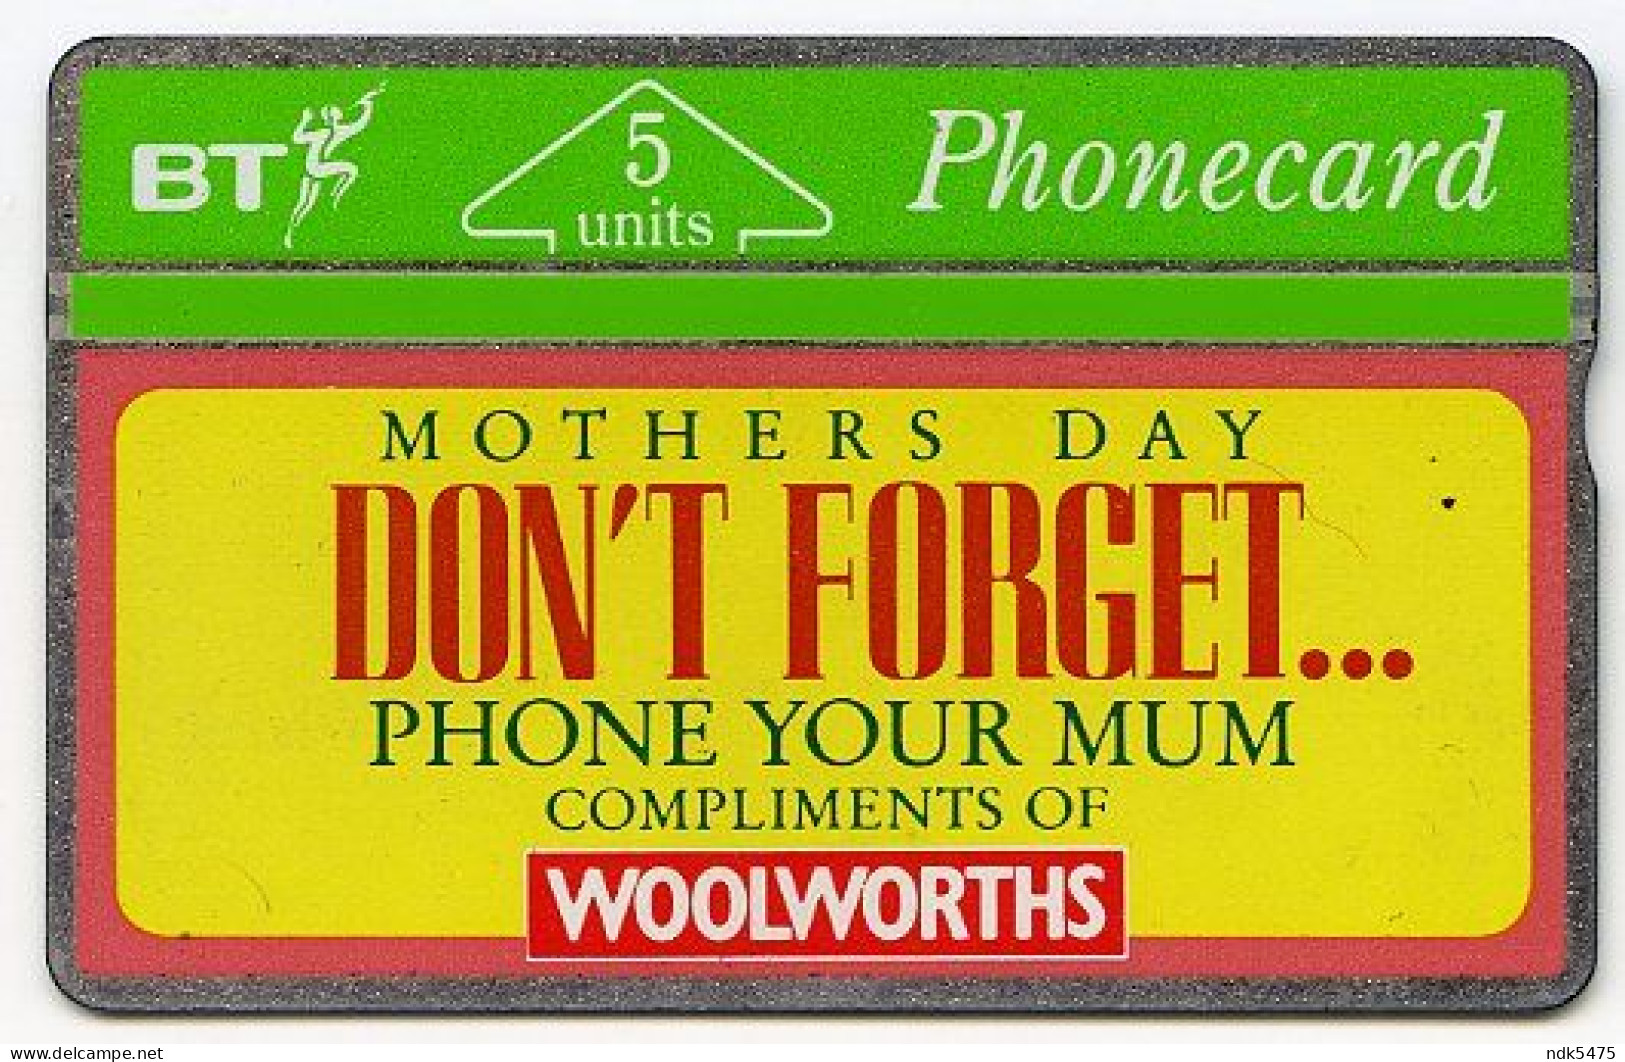 BT PHONECARD : WOOLWORTHS - MOTHERS DAY : 5 UNITS - BT Advertising Issues